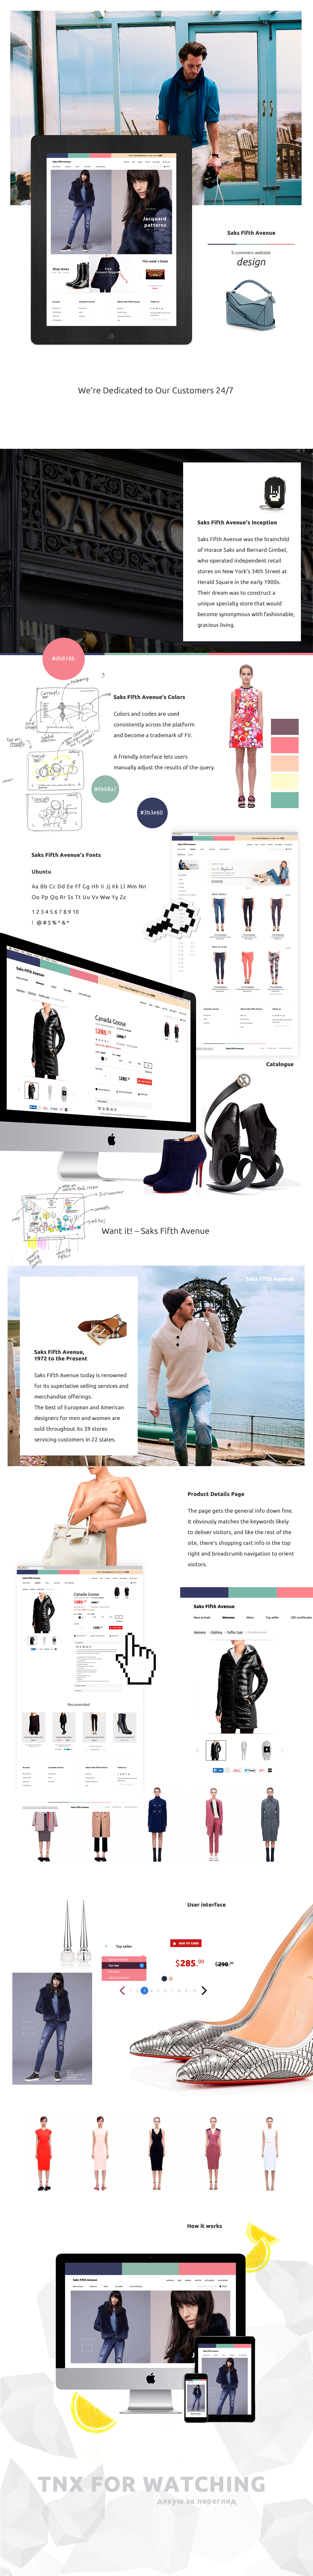 Web shop e-commers add to bag designers checkout